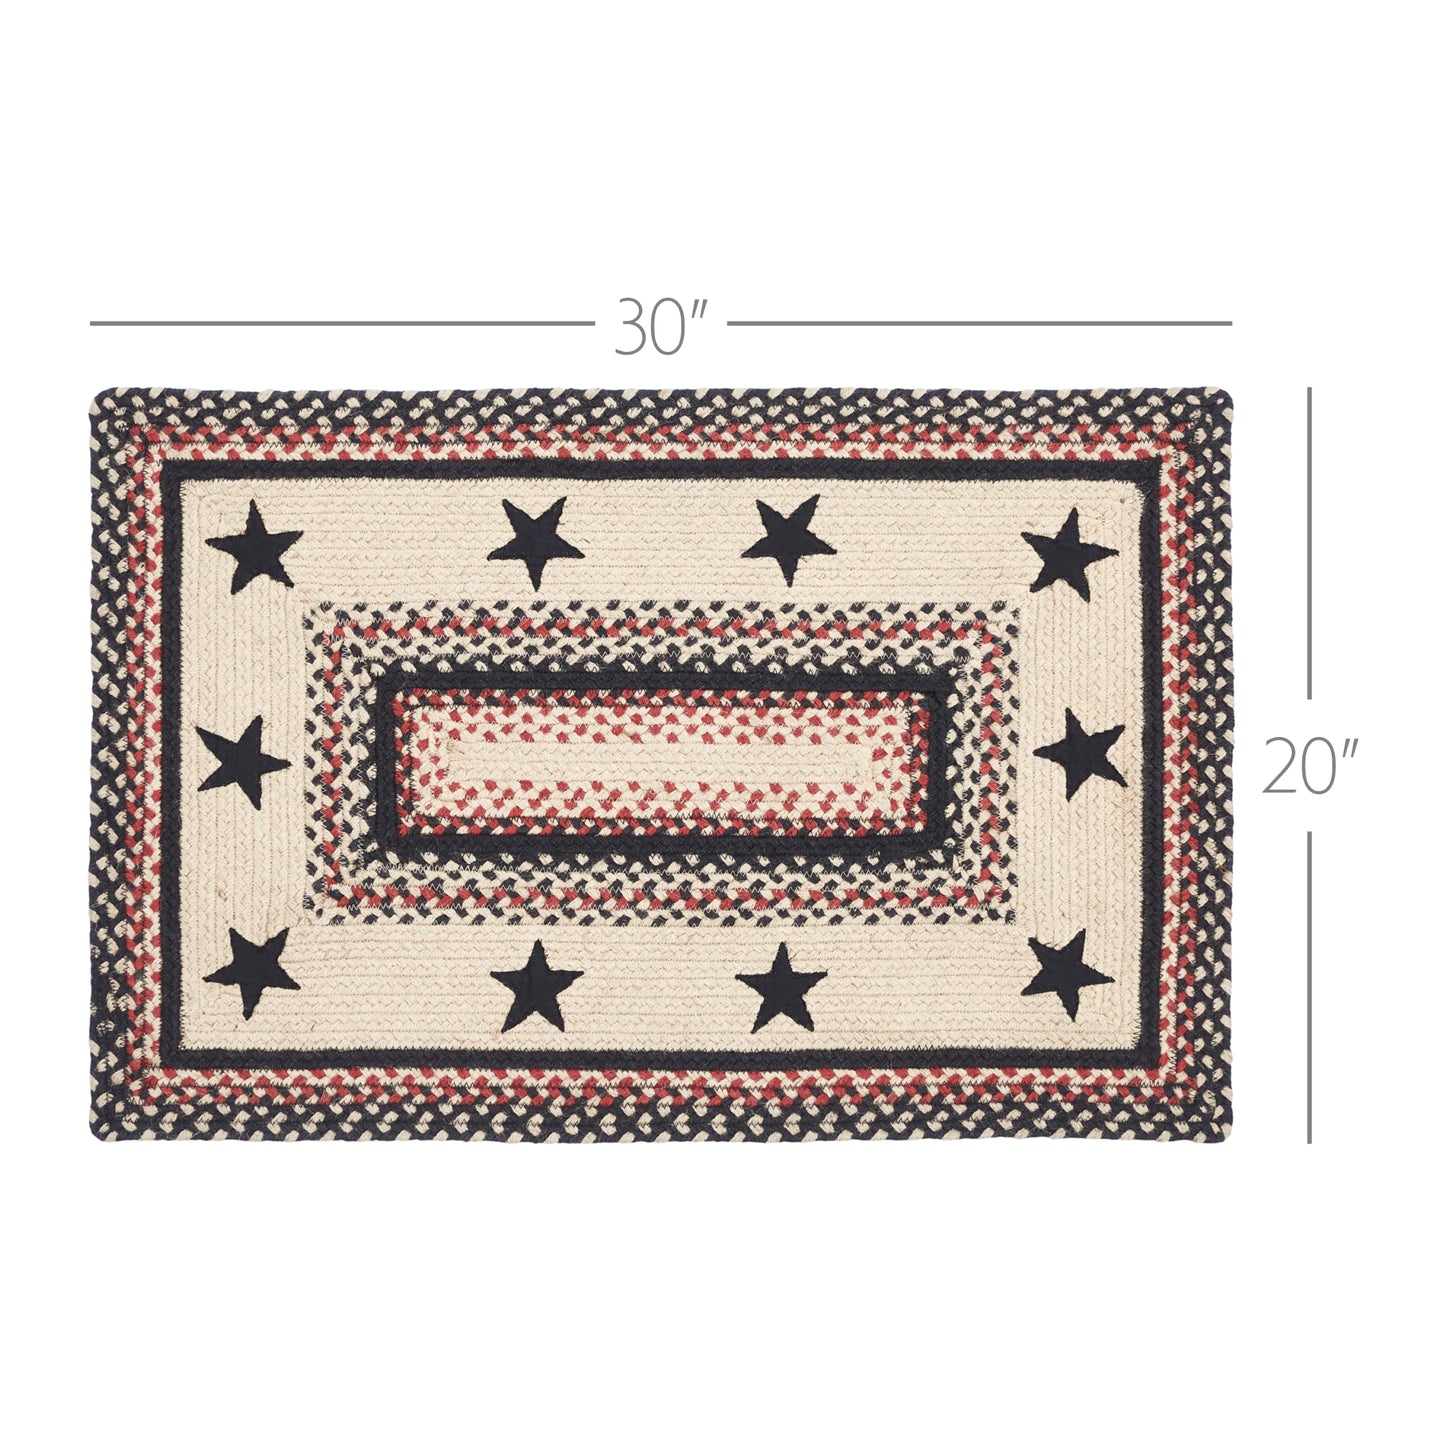 67012-Colonial-Star-Jute-Rug-Rect-w-Pad-20x30-image-2